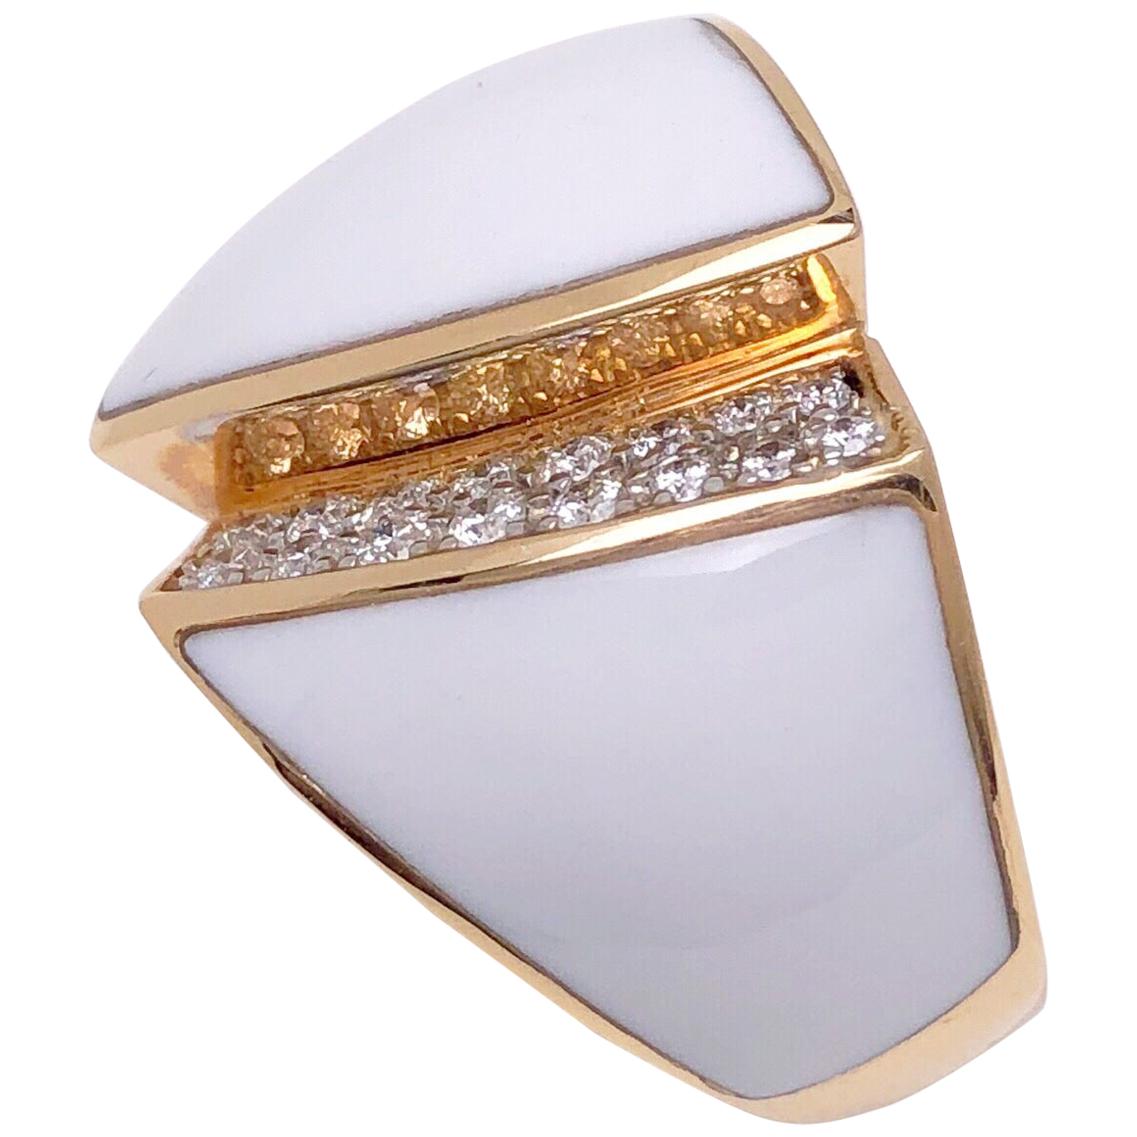 Chimento 18 Karat Rose Gold Desiderio Ring with White Agate and Diamonds